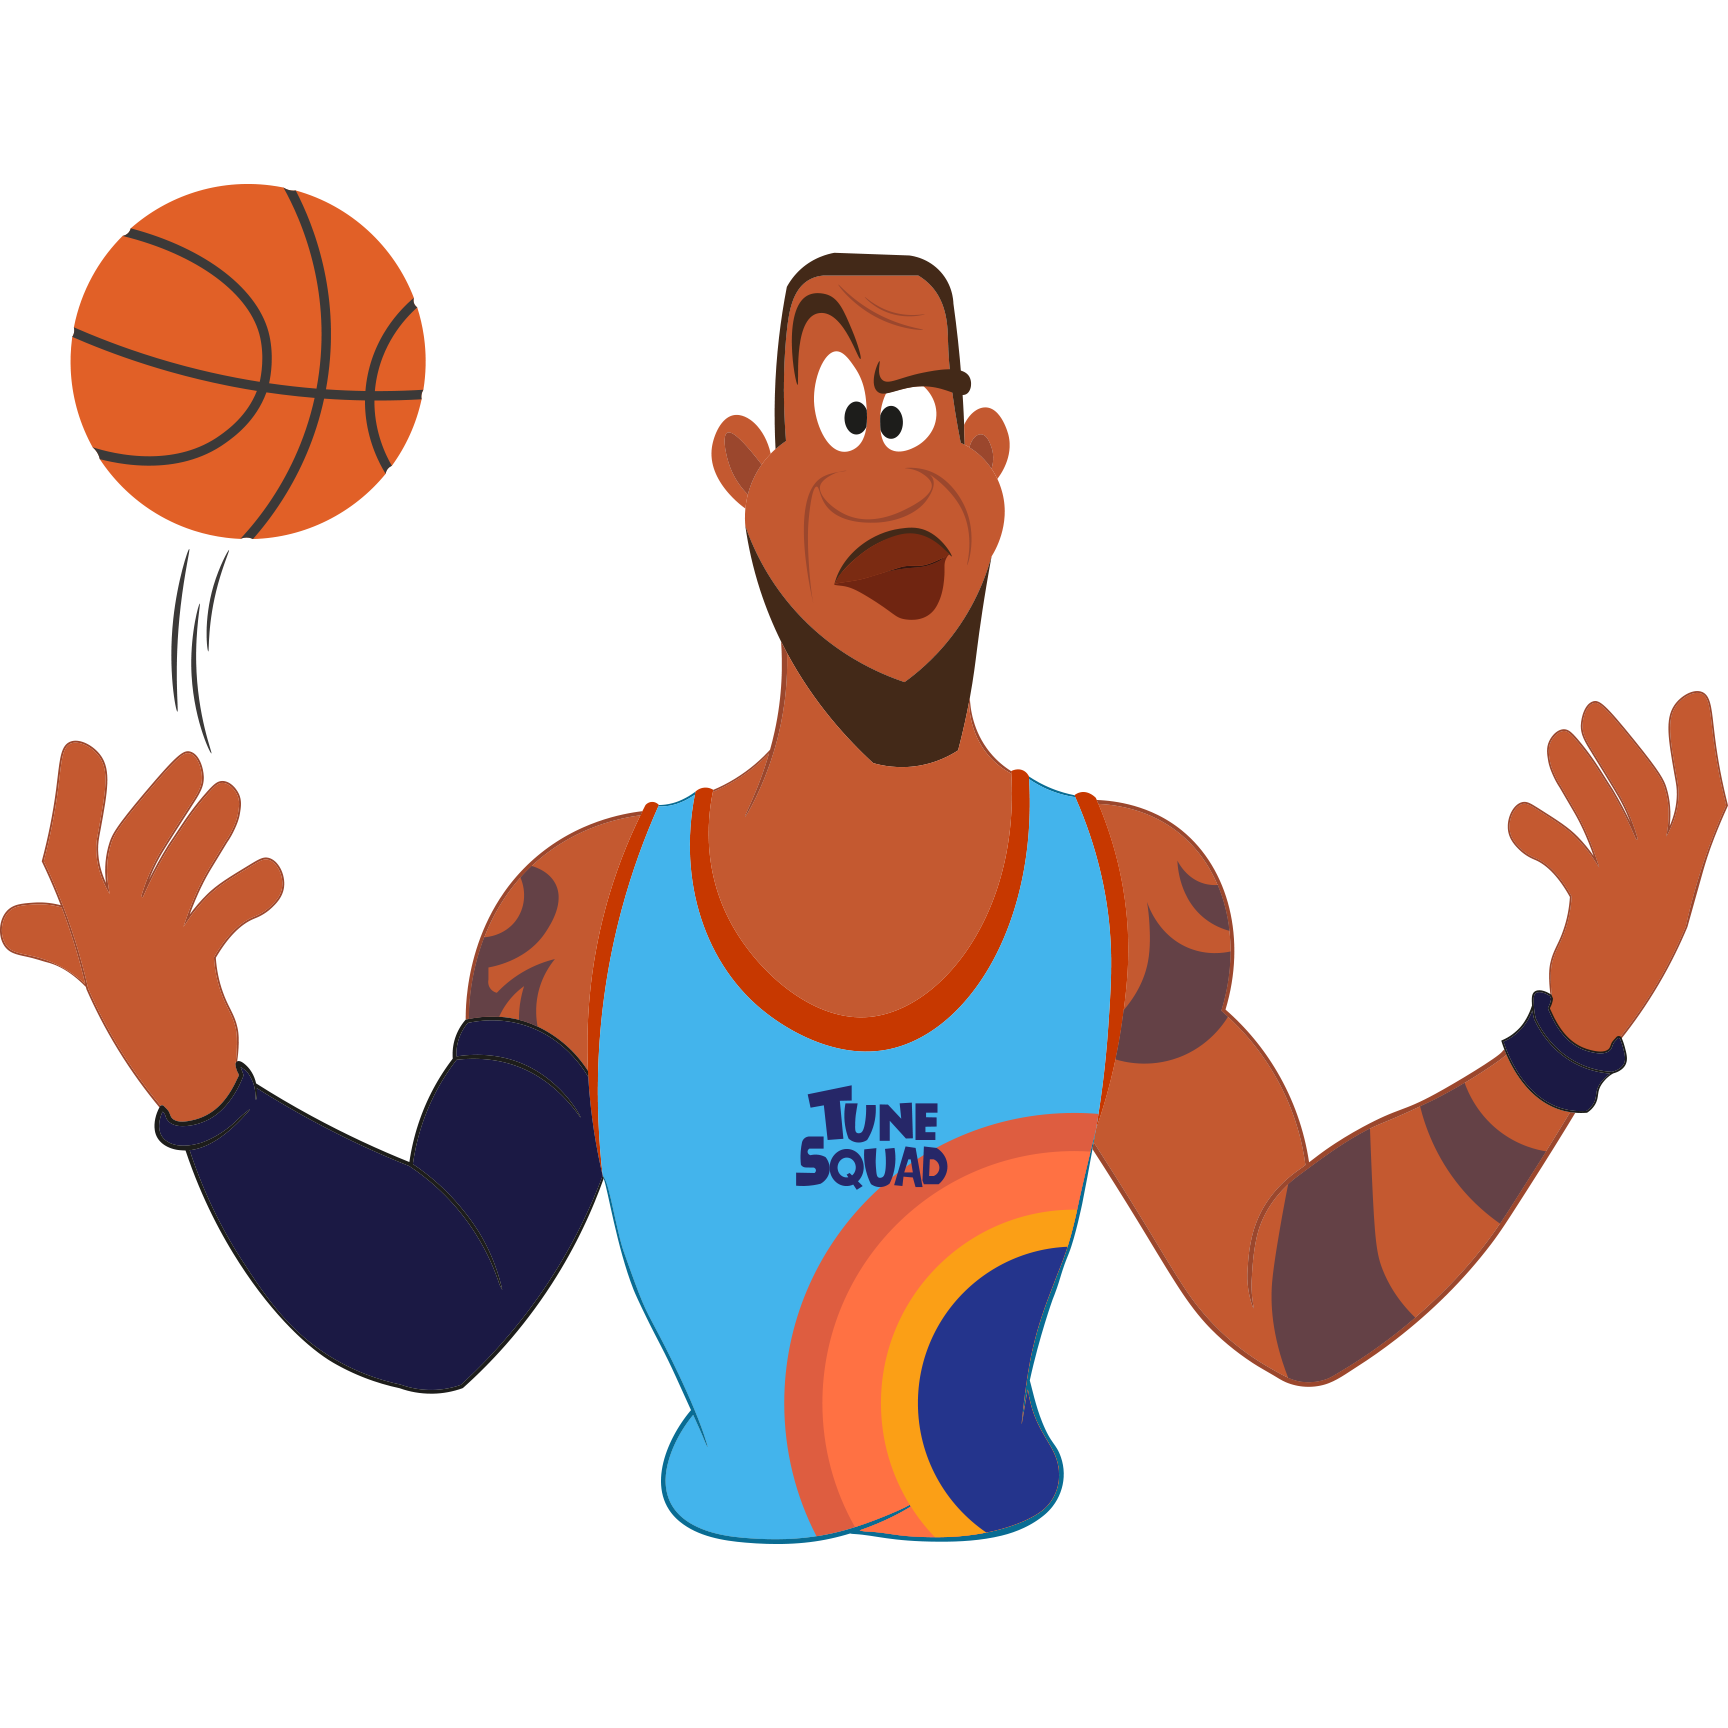 0 Result Images of Space Jam 2 Characters Png - PNG Image Collection